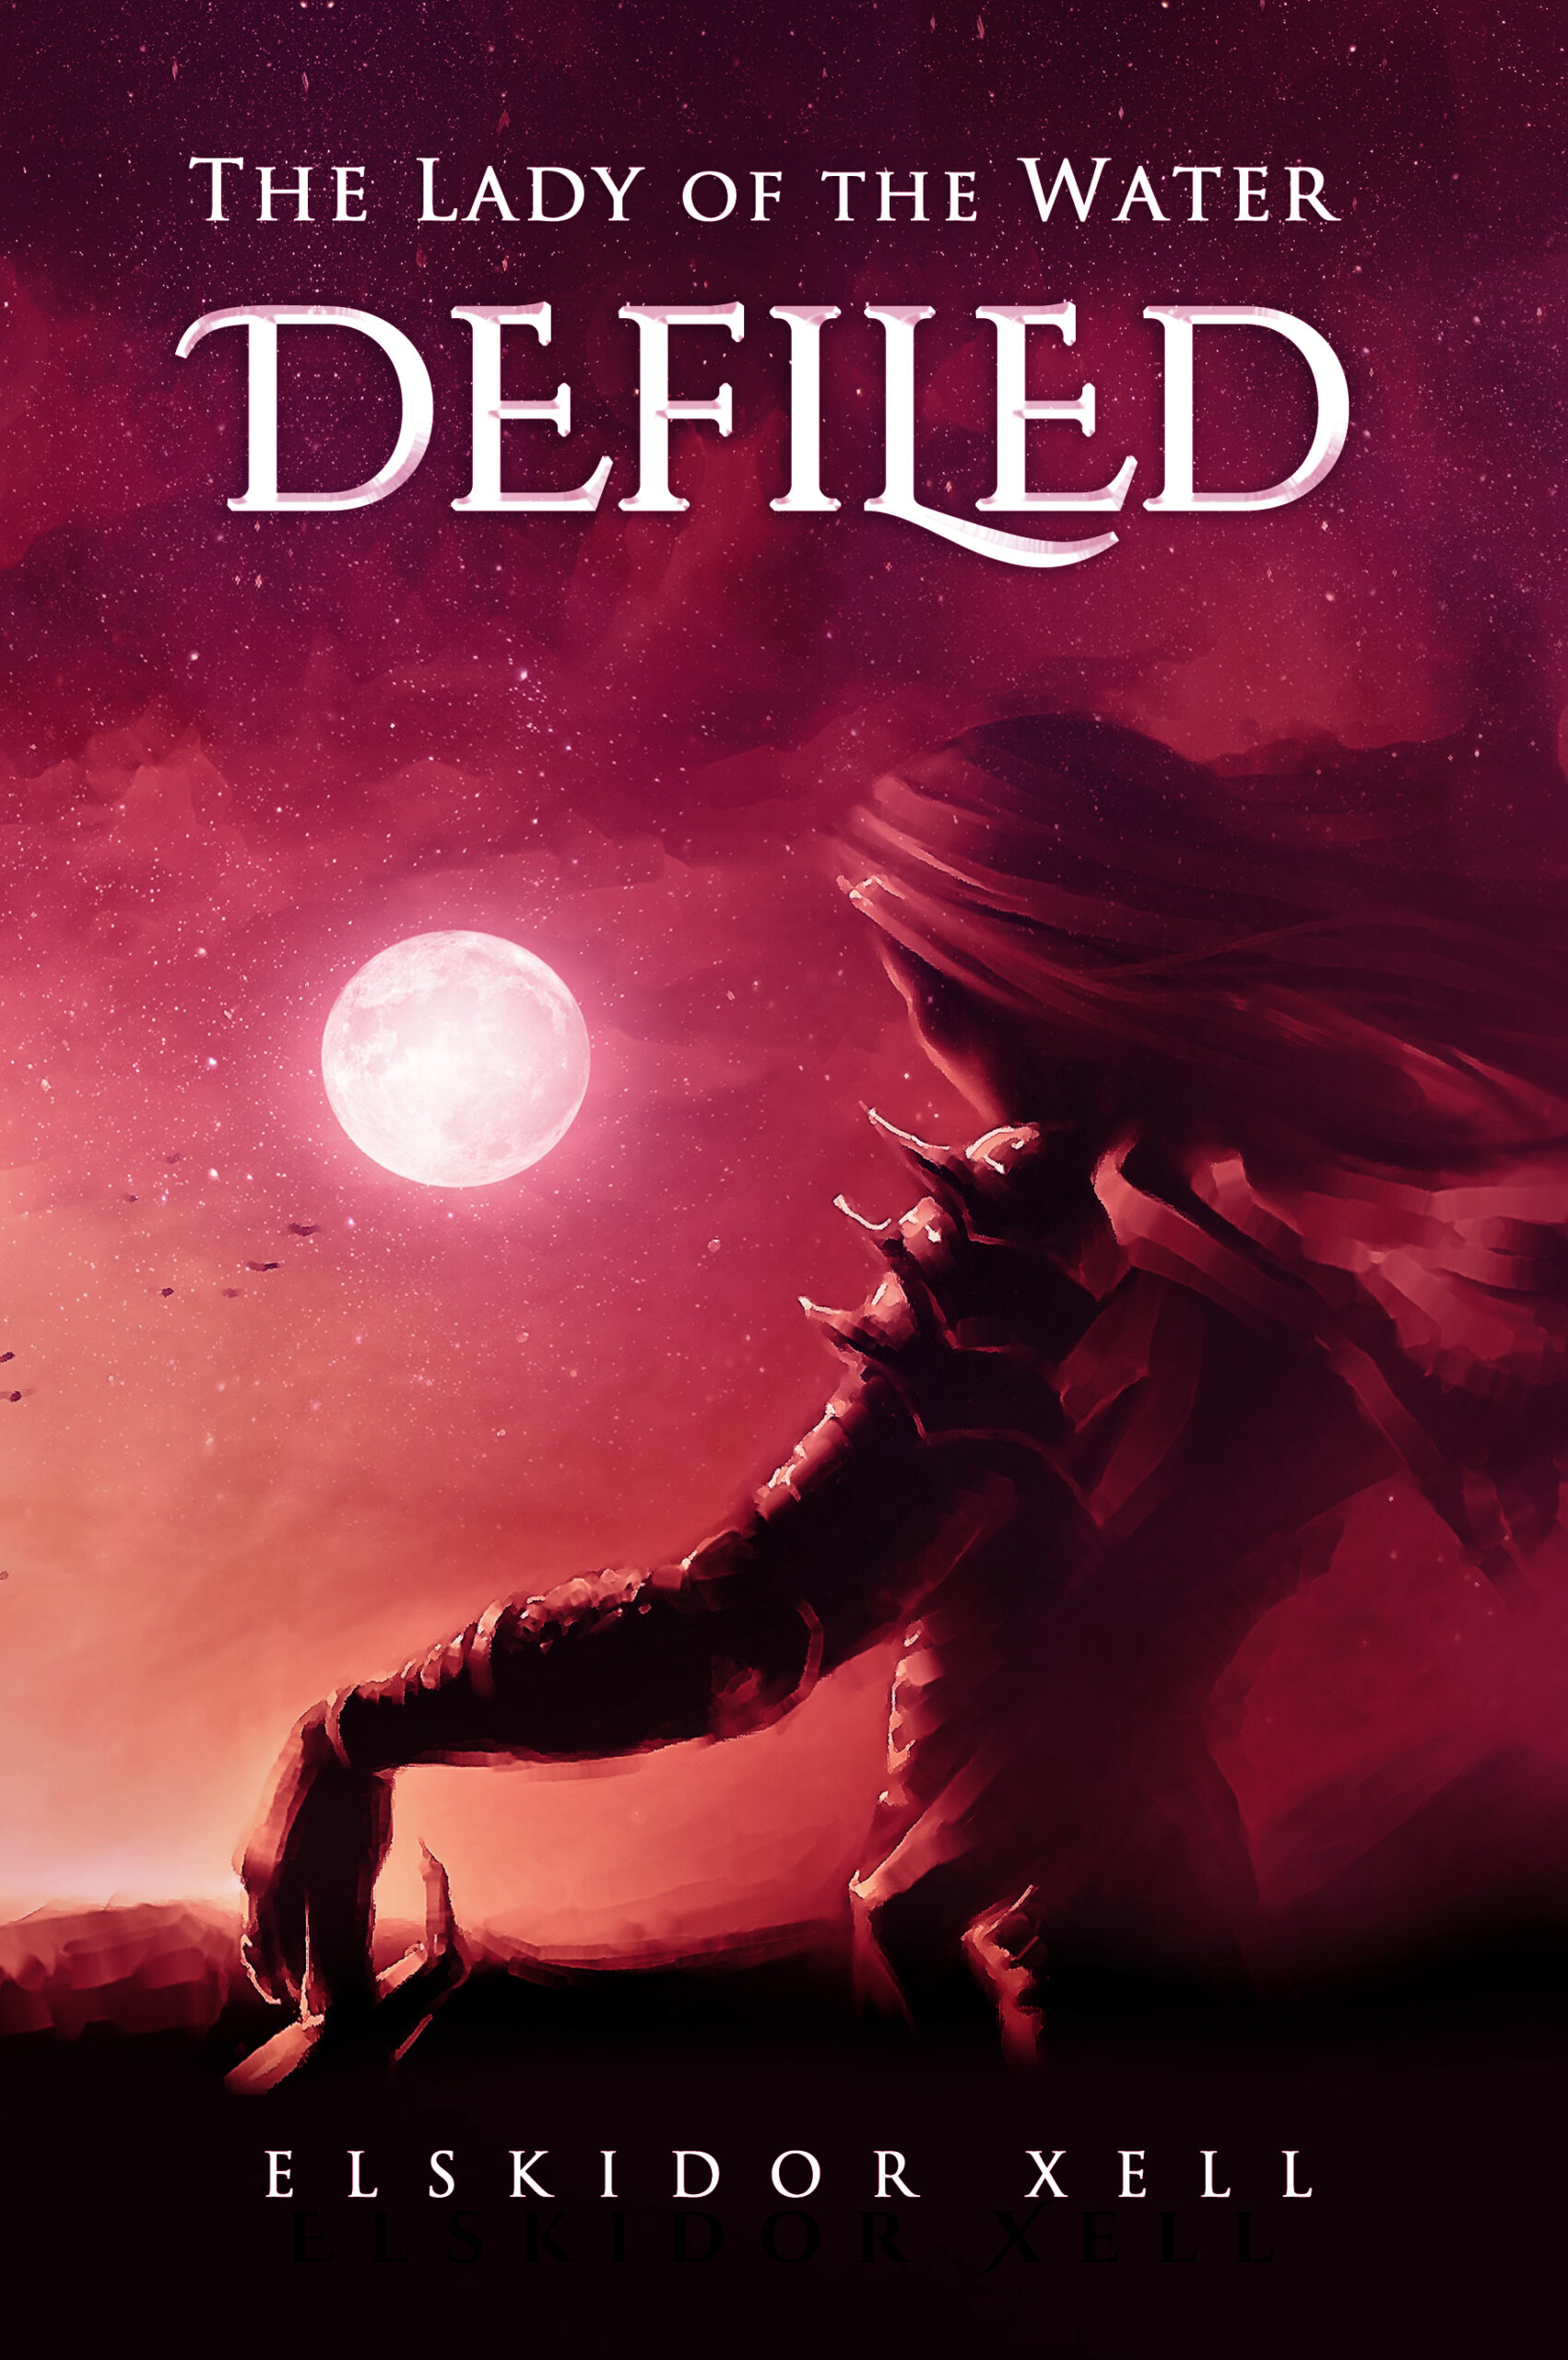 FREE: Defiled by Elskidor Xell